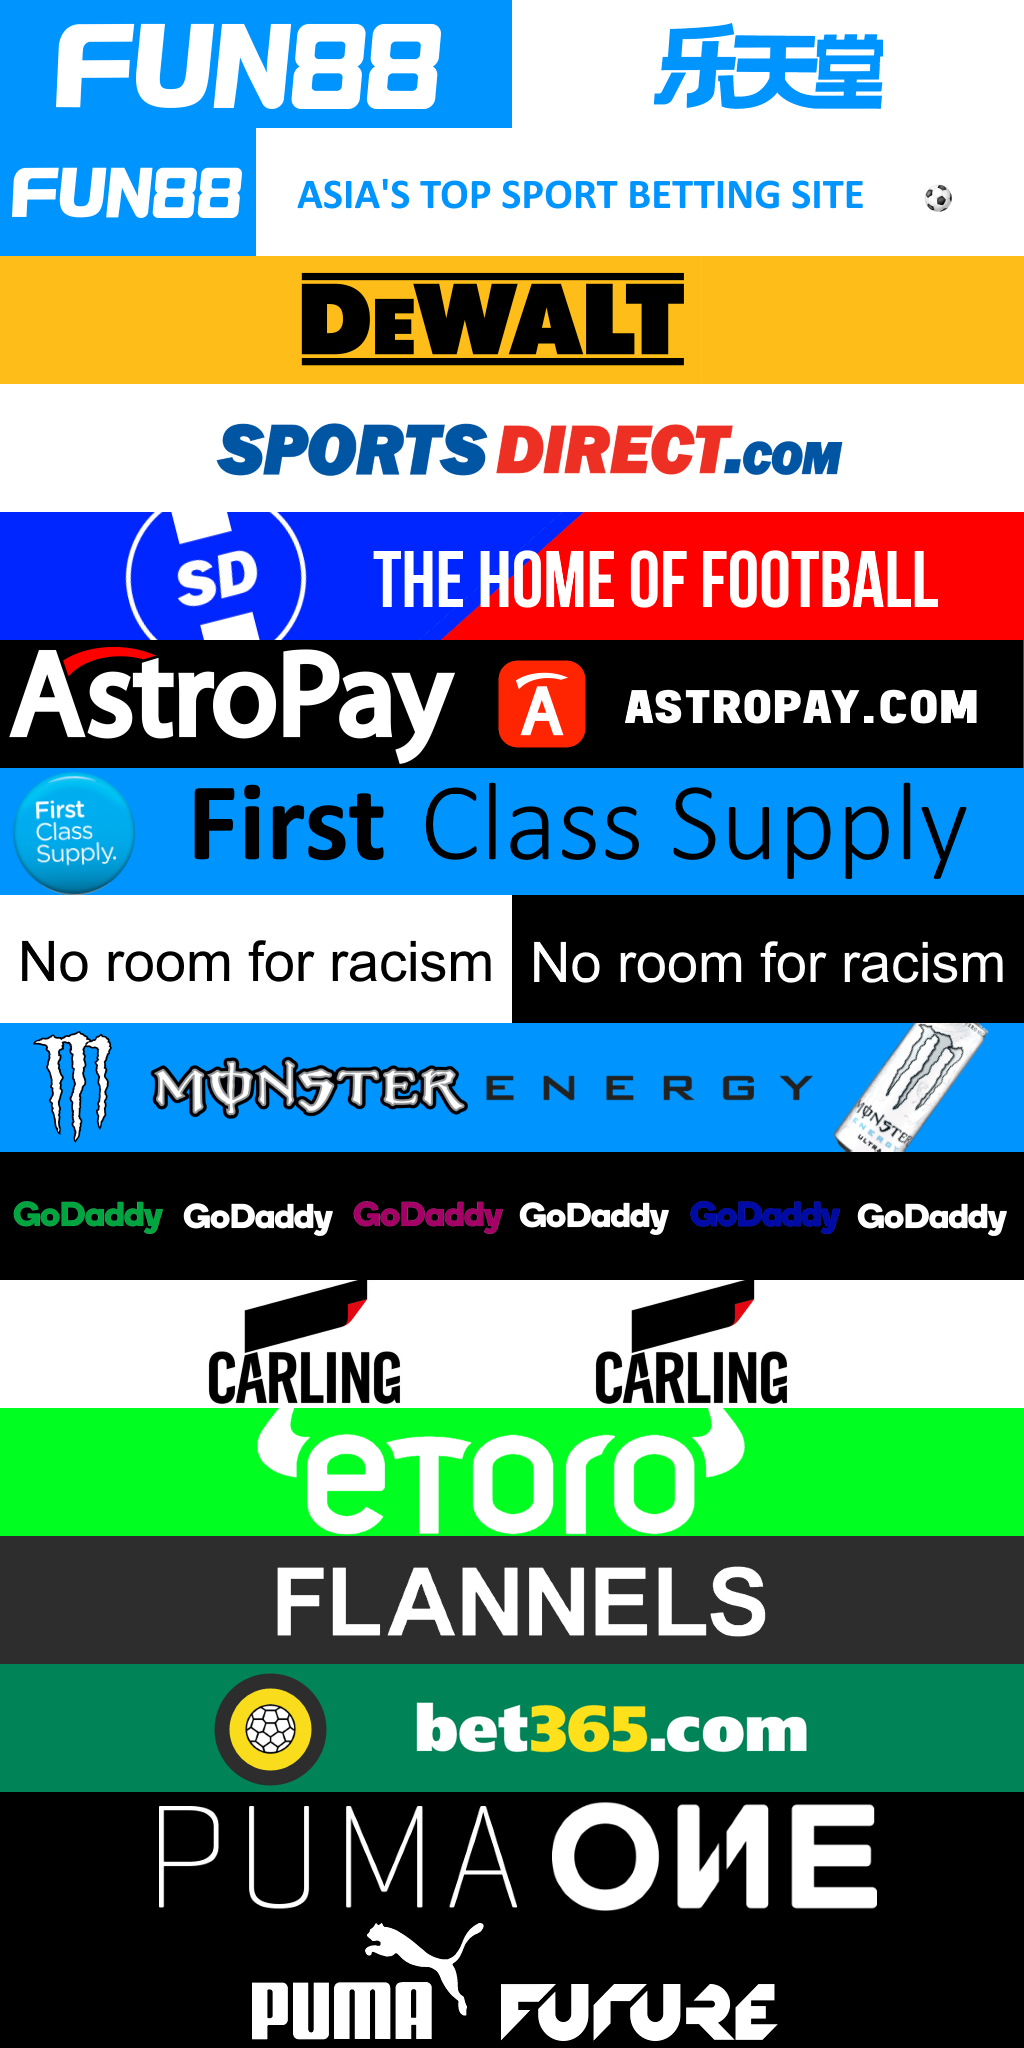 NUFC_ADBOARDS_4_2.png